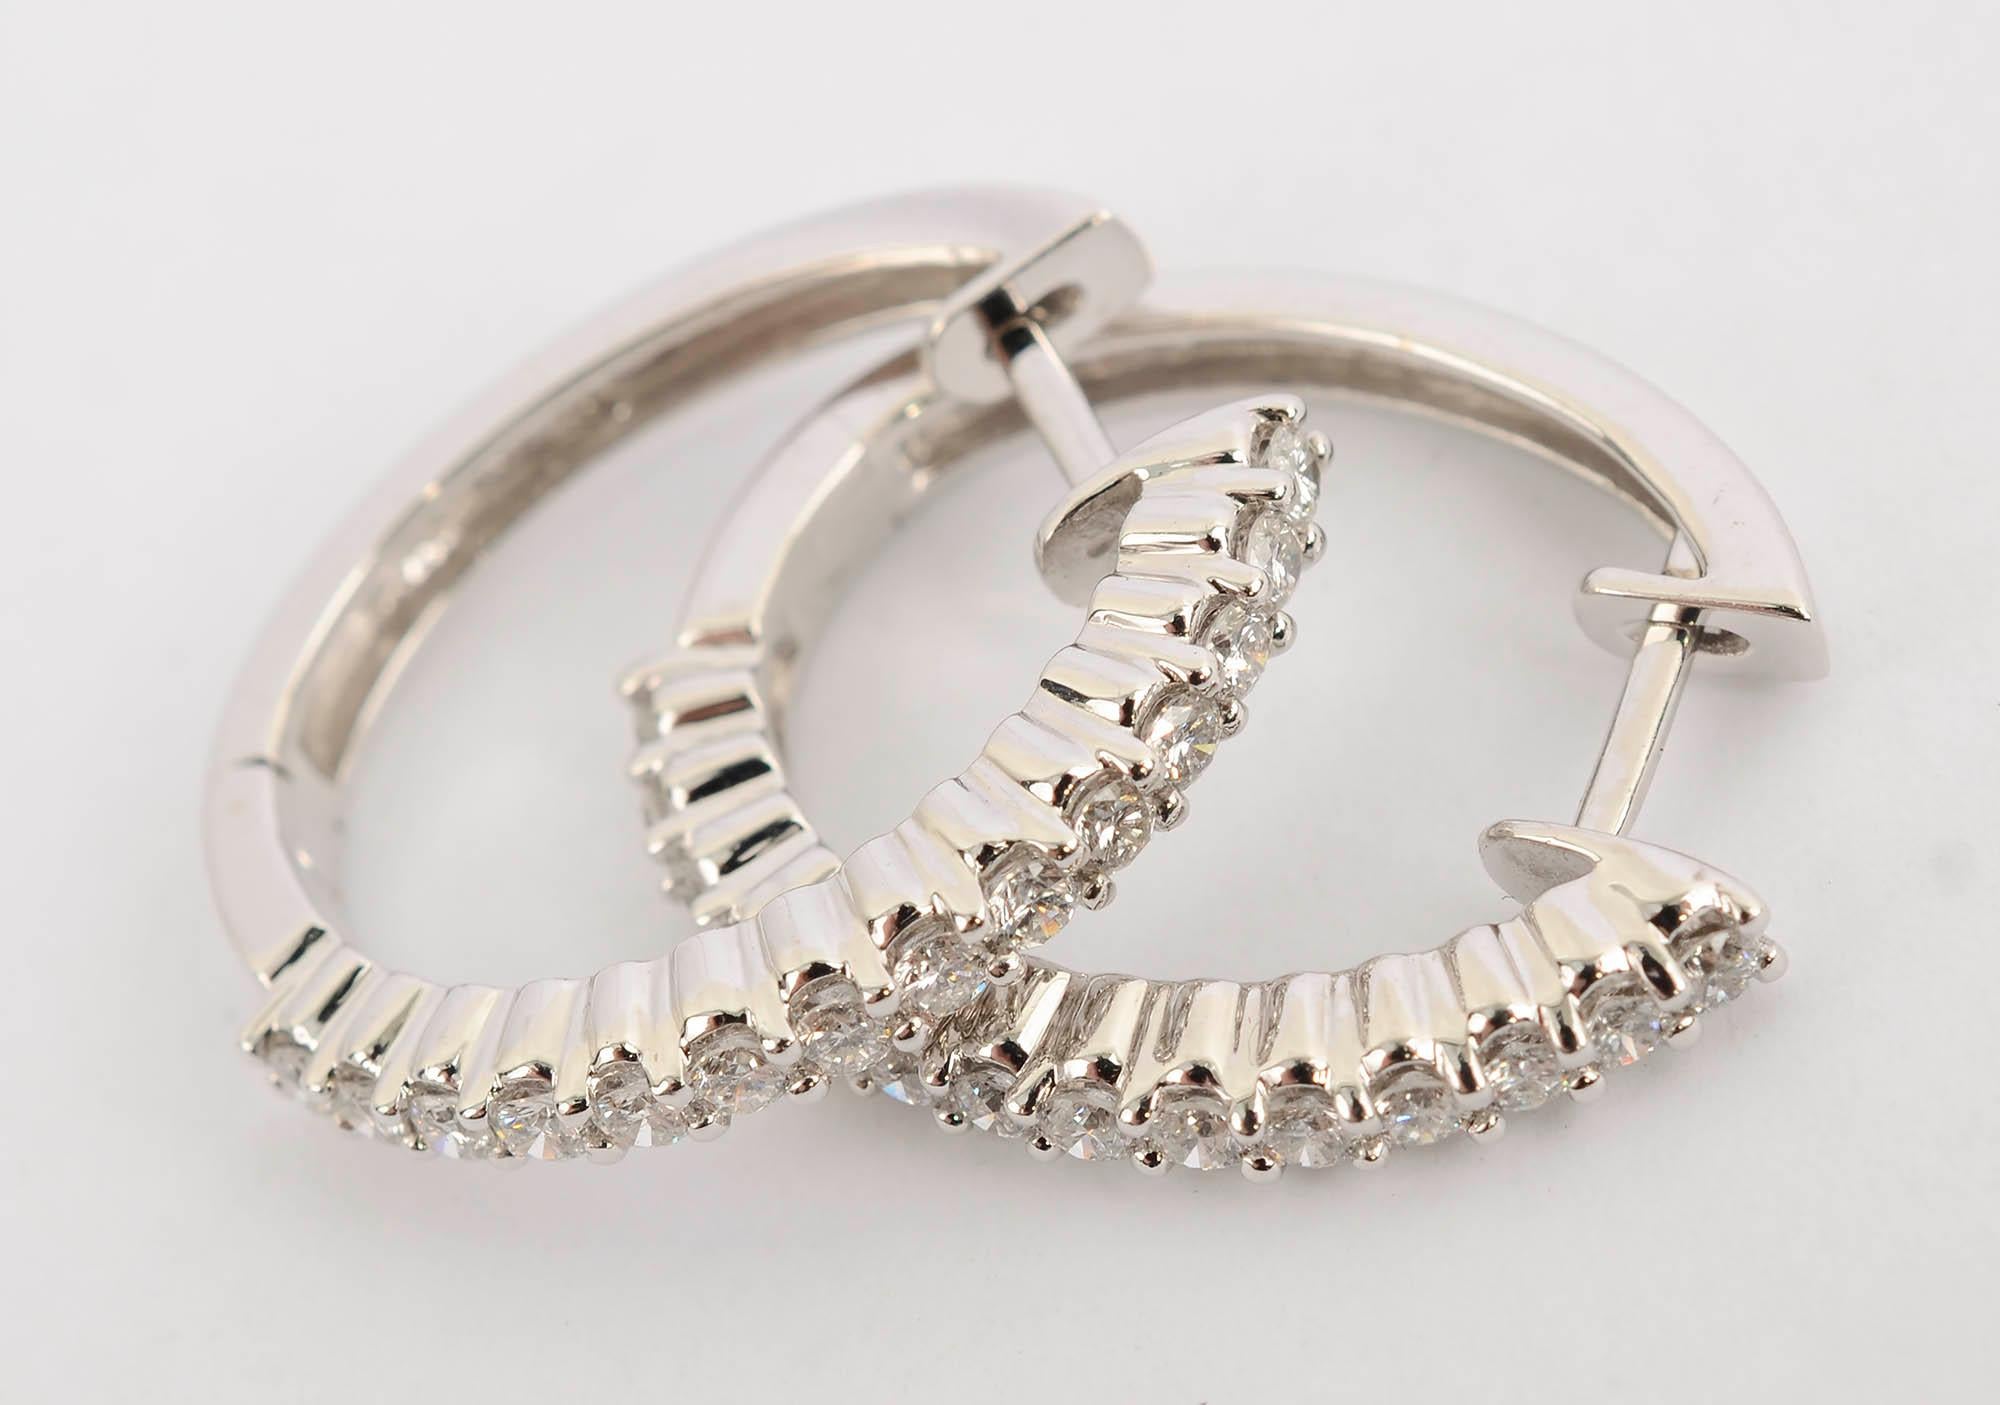 Chic oval hoop earrings by Sonia B are made of 14 karat white gold. The front is covered with 14 diamonds of H color; VS- SI quality The diamonds weigh a total of approximately 1.1 carats. Backs are posts. The earrings are one inch long and 7/8 inch